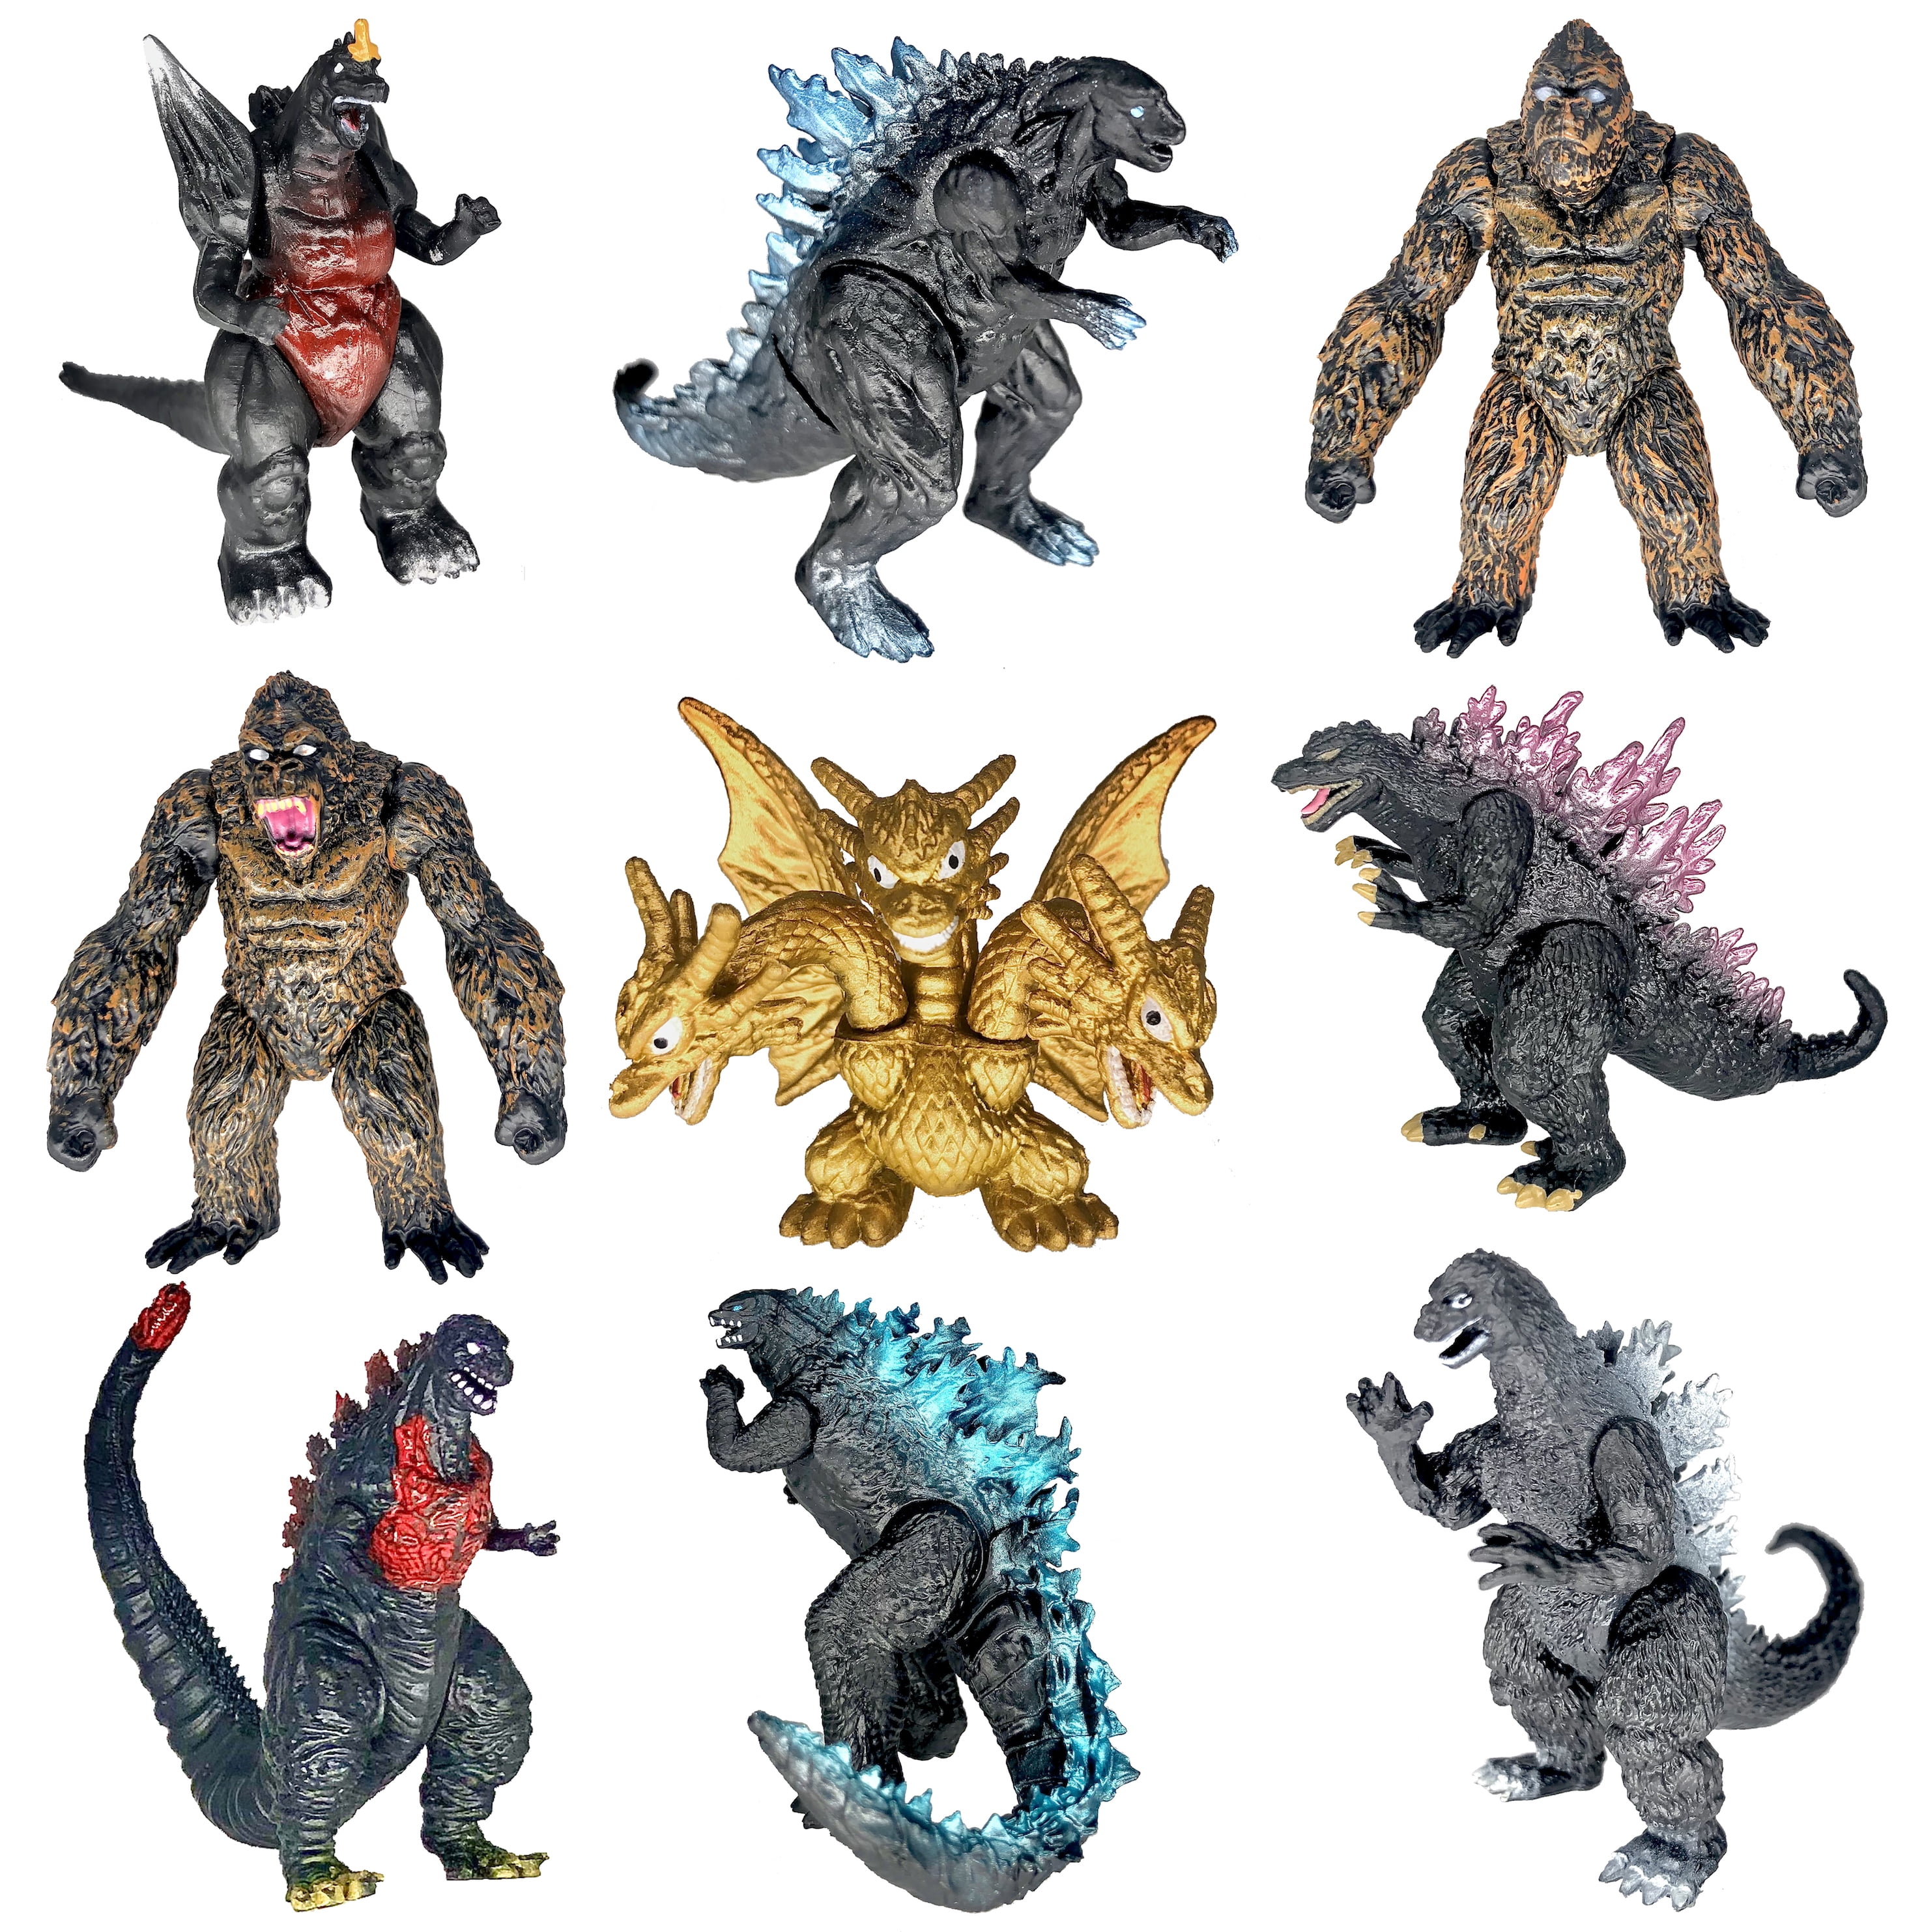 Godzilla 35430SG Toy Figures & Playsets for sale online 